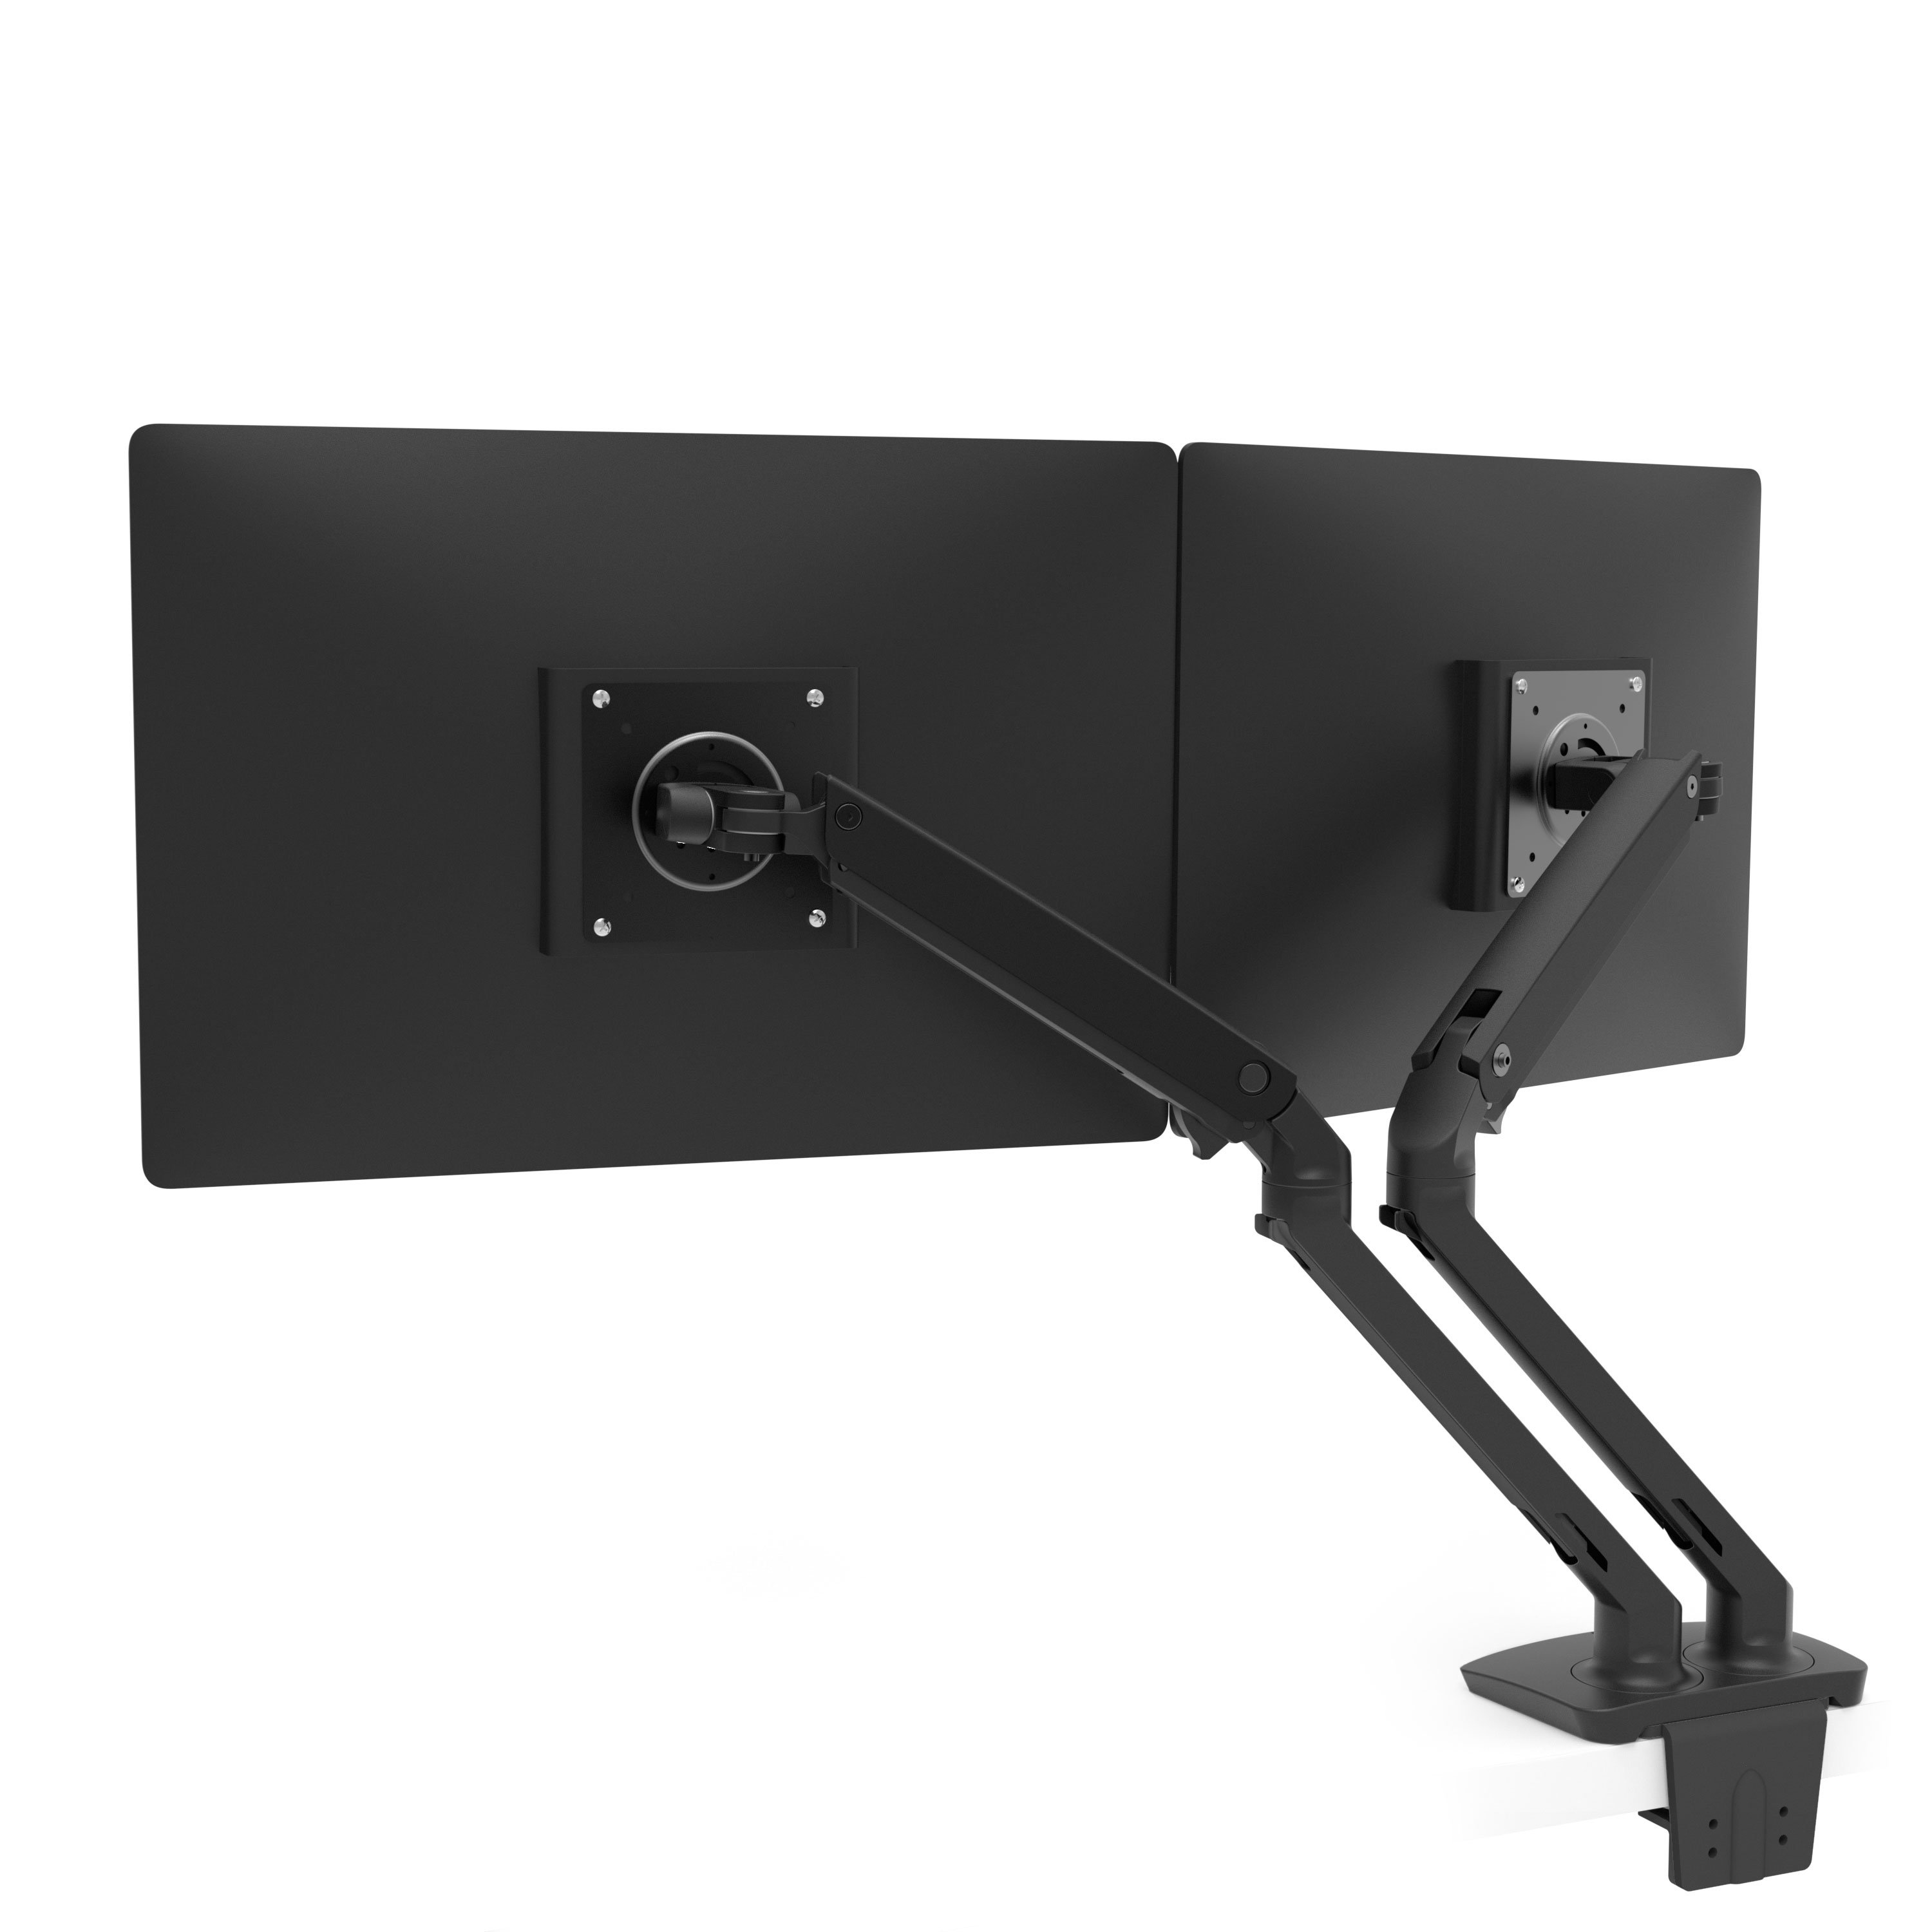 Ergotron Mounting Arm For Flat Panel Display 46" Screen All-in-one Computer 